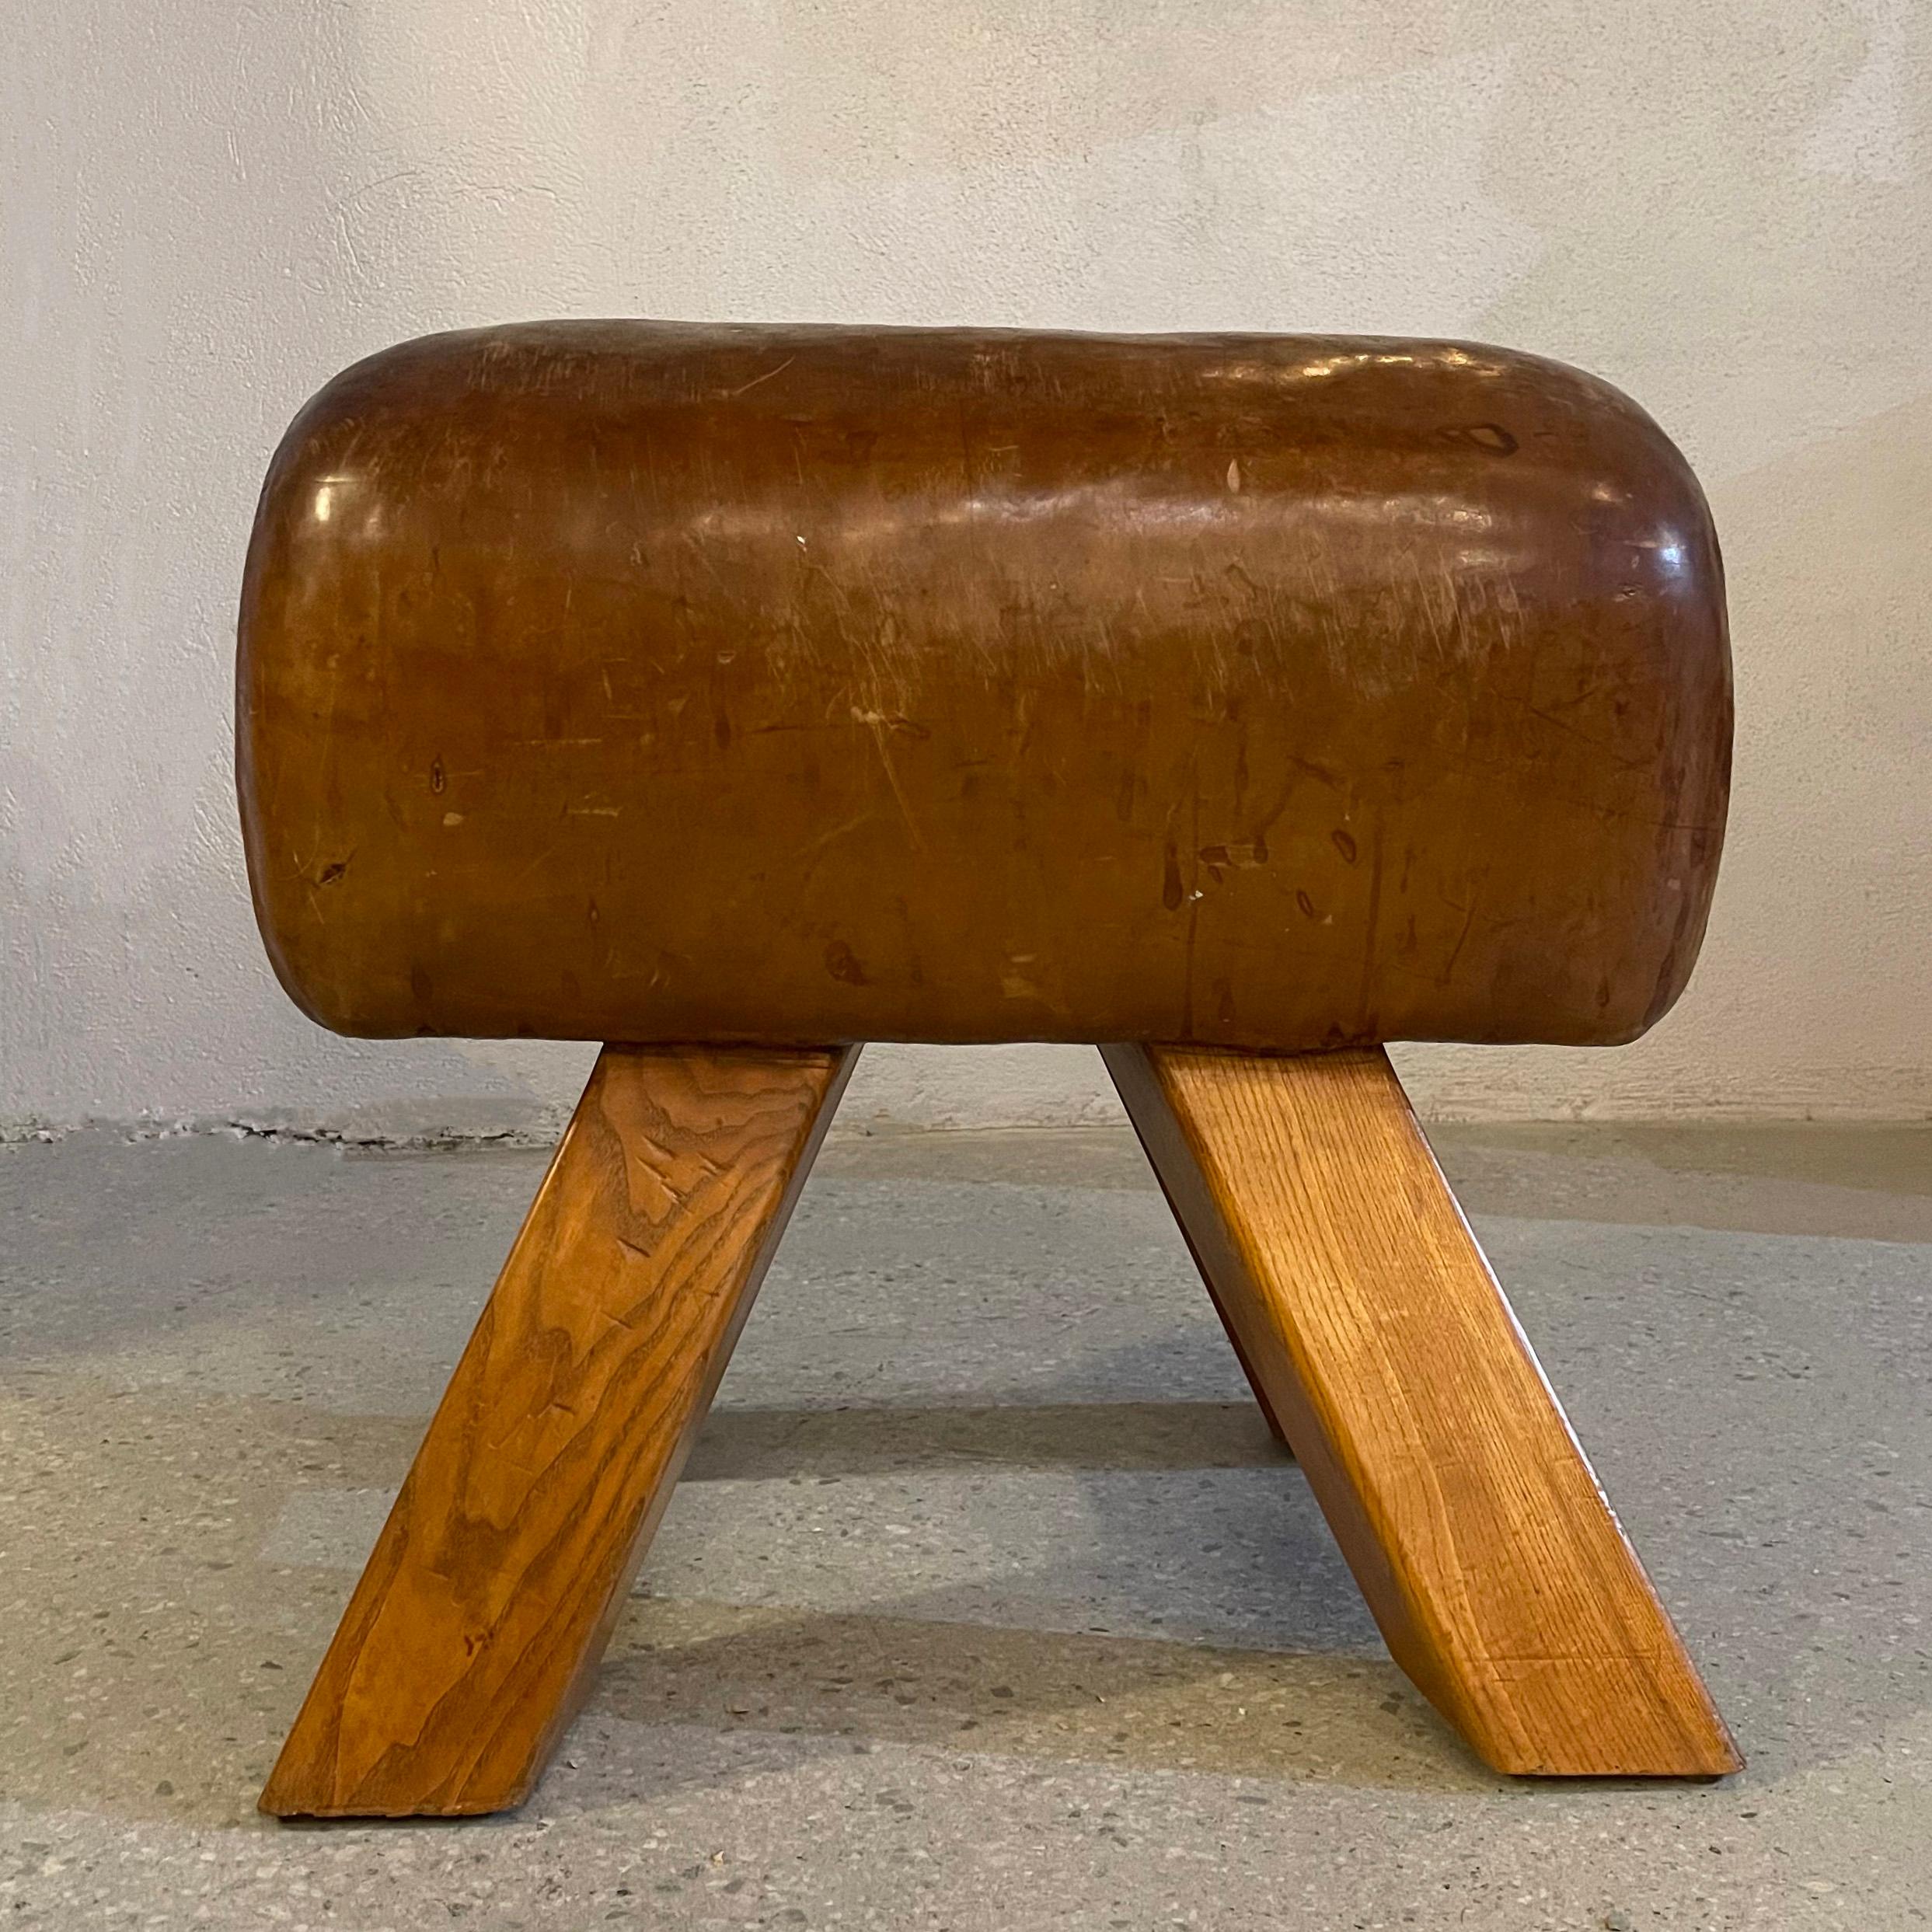 Industrial Leather Gymnastic Pommel Horse Bench In Good Condition For Sale In Brooklyn, NY